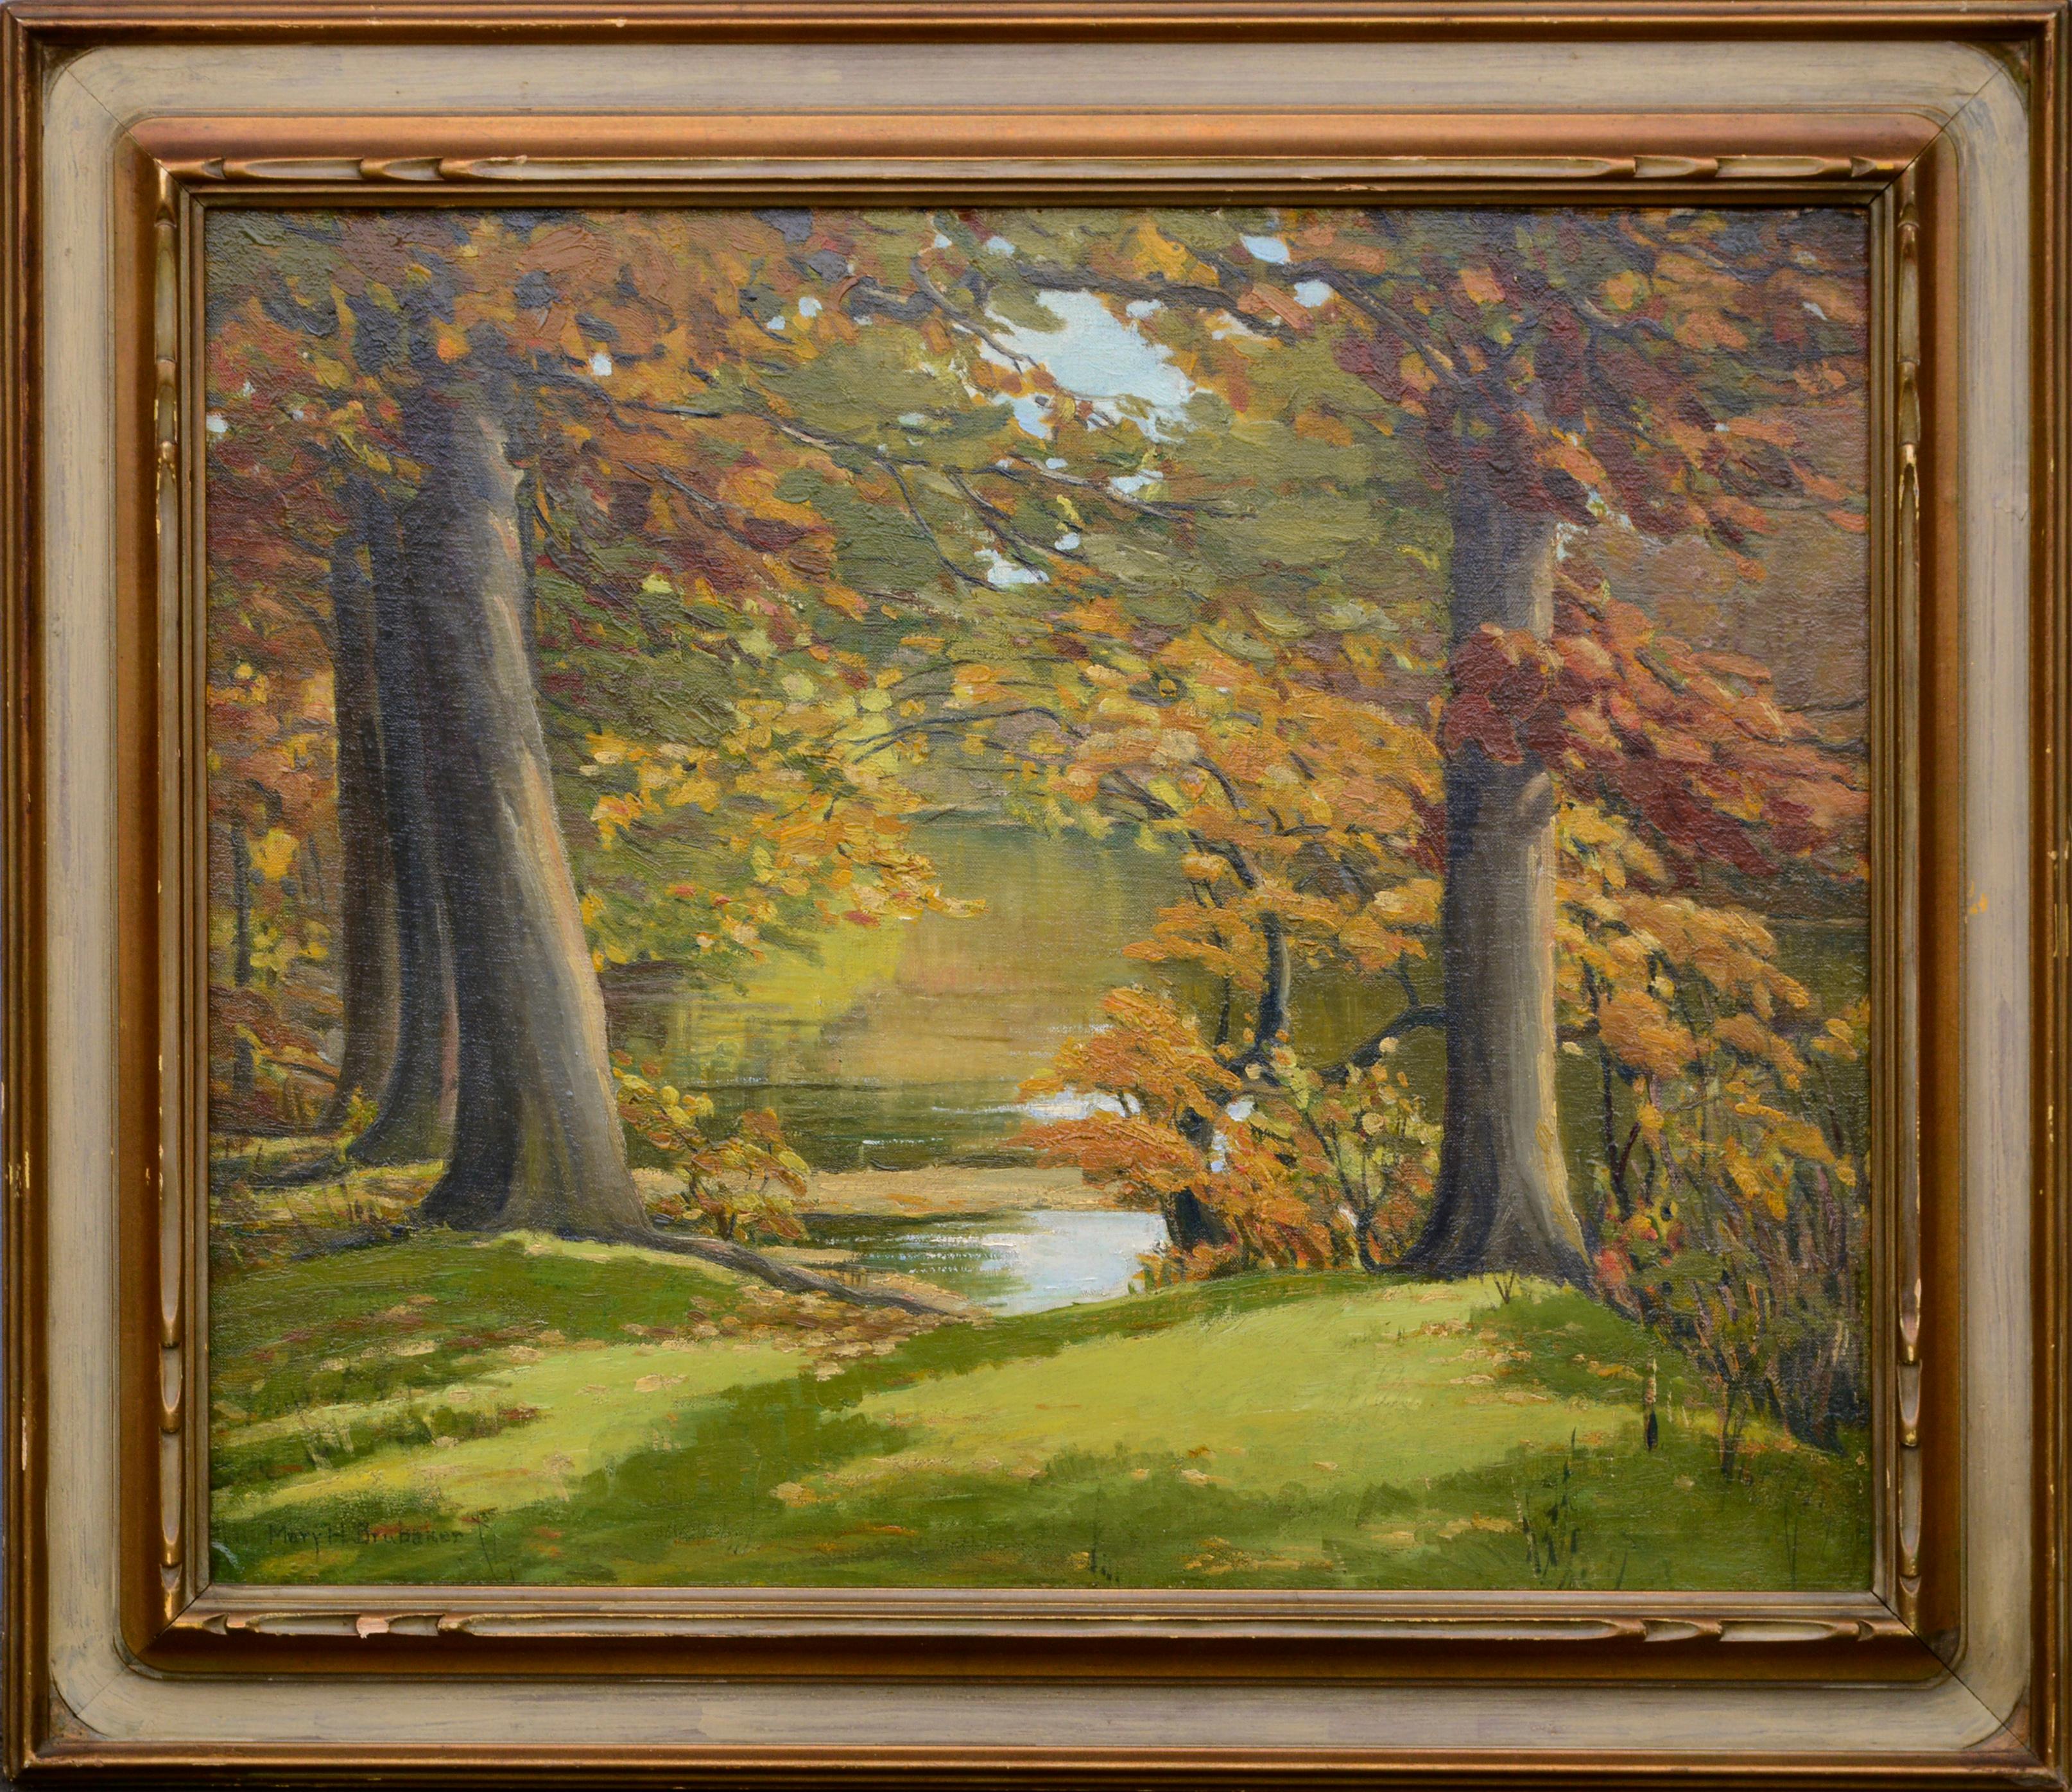 Elm Trees in Autumn Landscape in Antique Newcomb-Macklin Frame